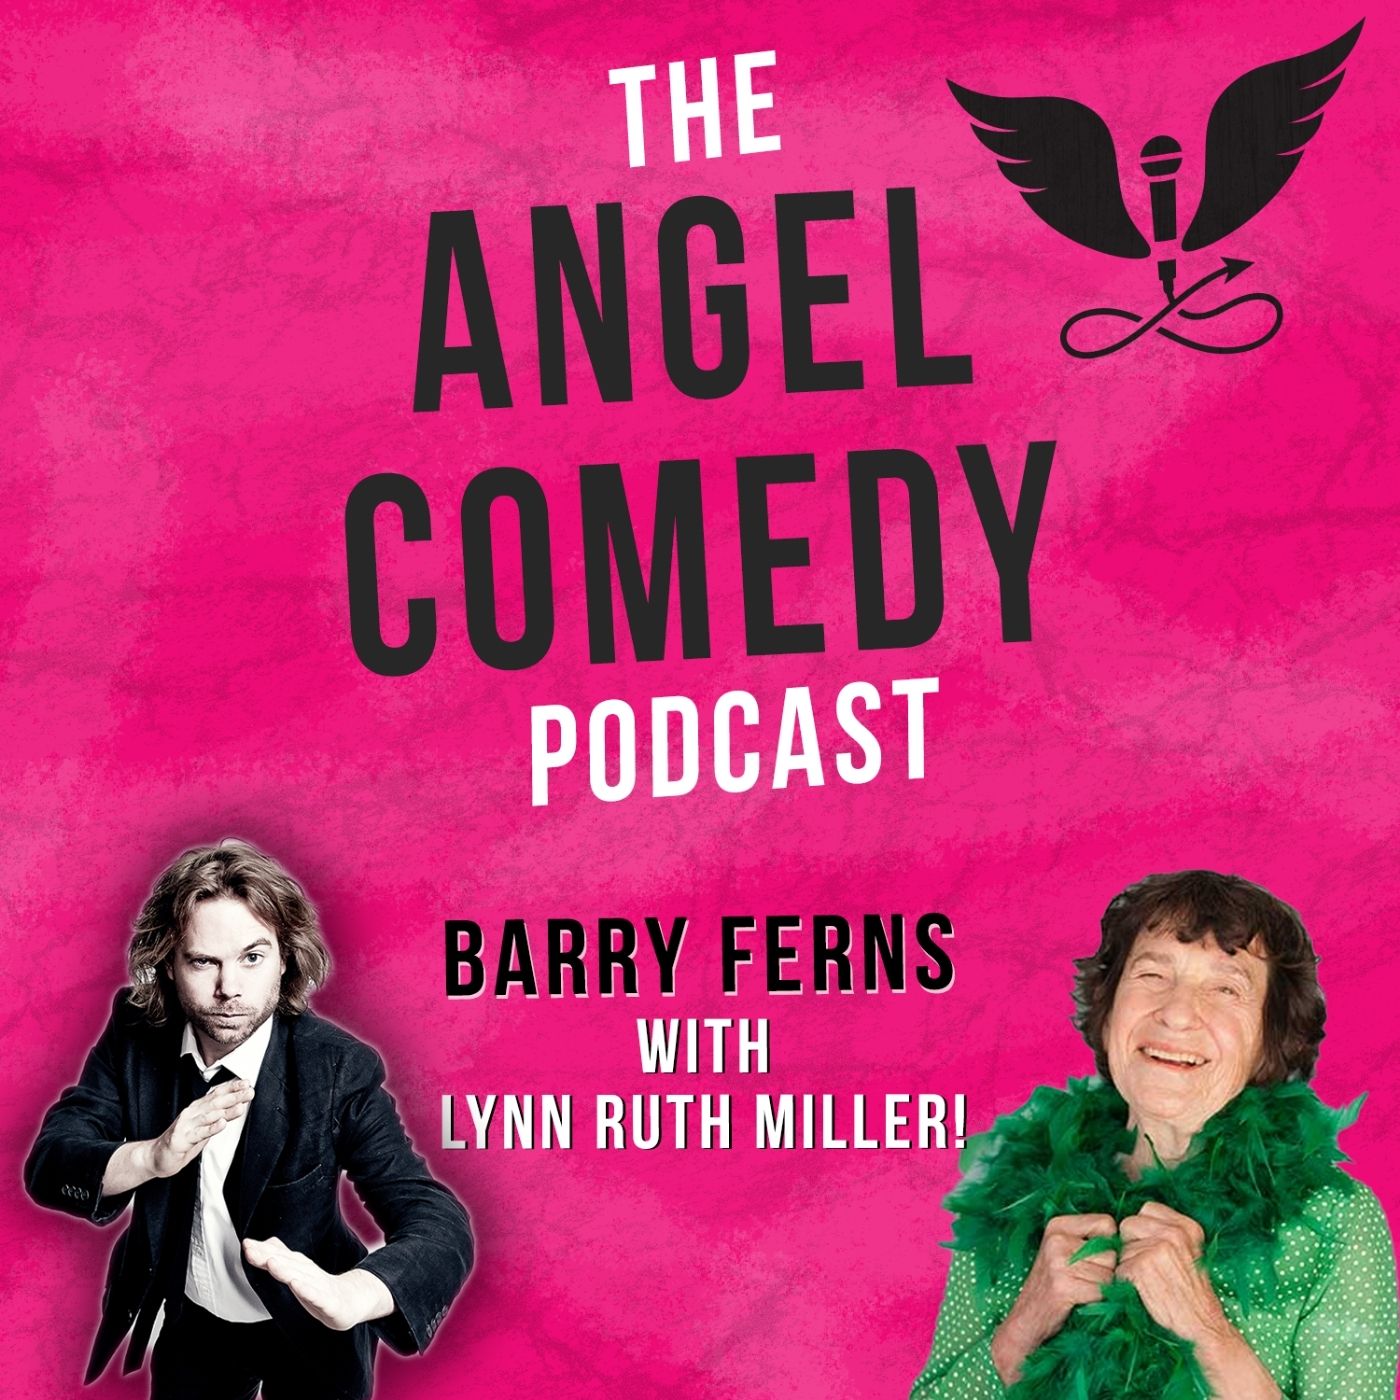 Podcast: The Angel Comedy Podcast with Lynn Ruth Miller - Angel Comedy